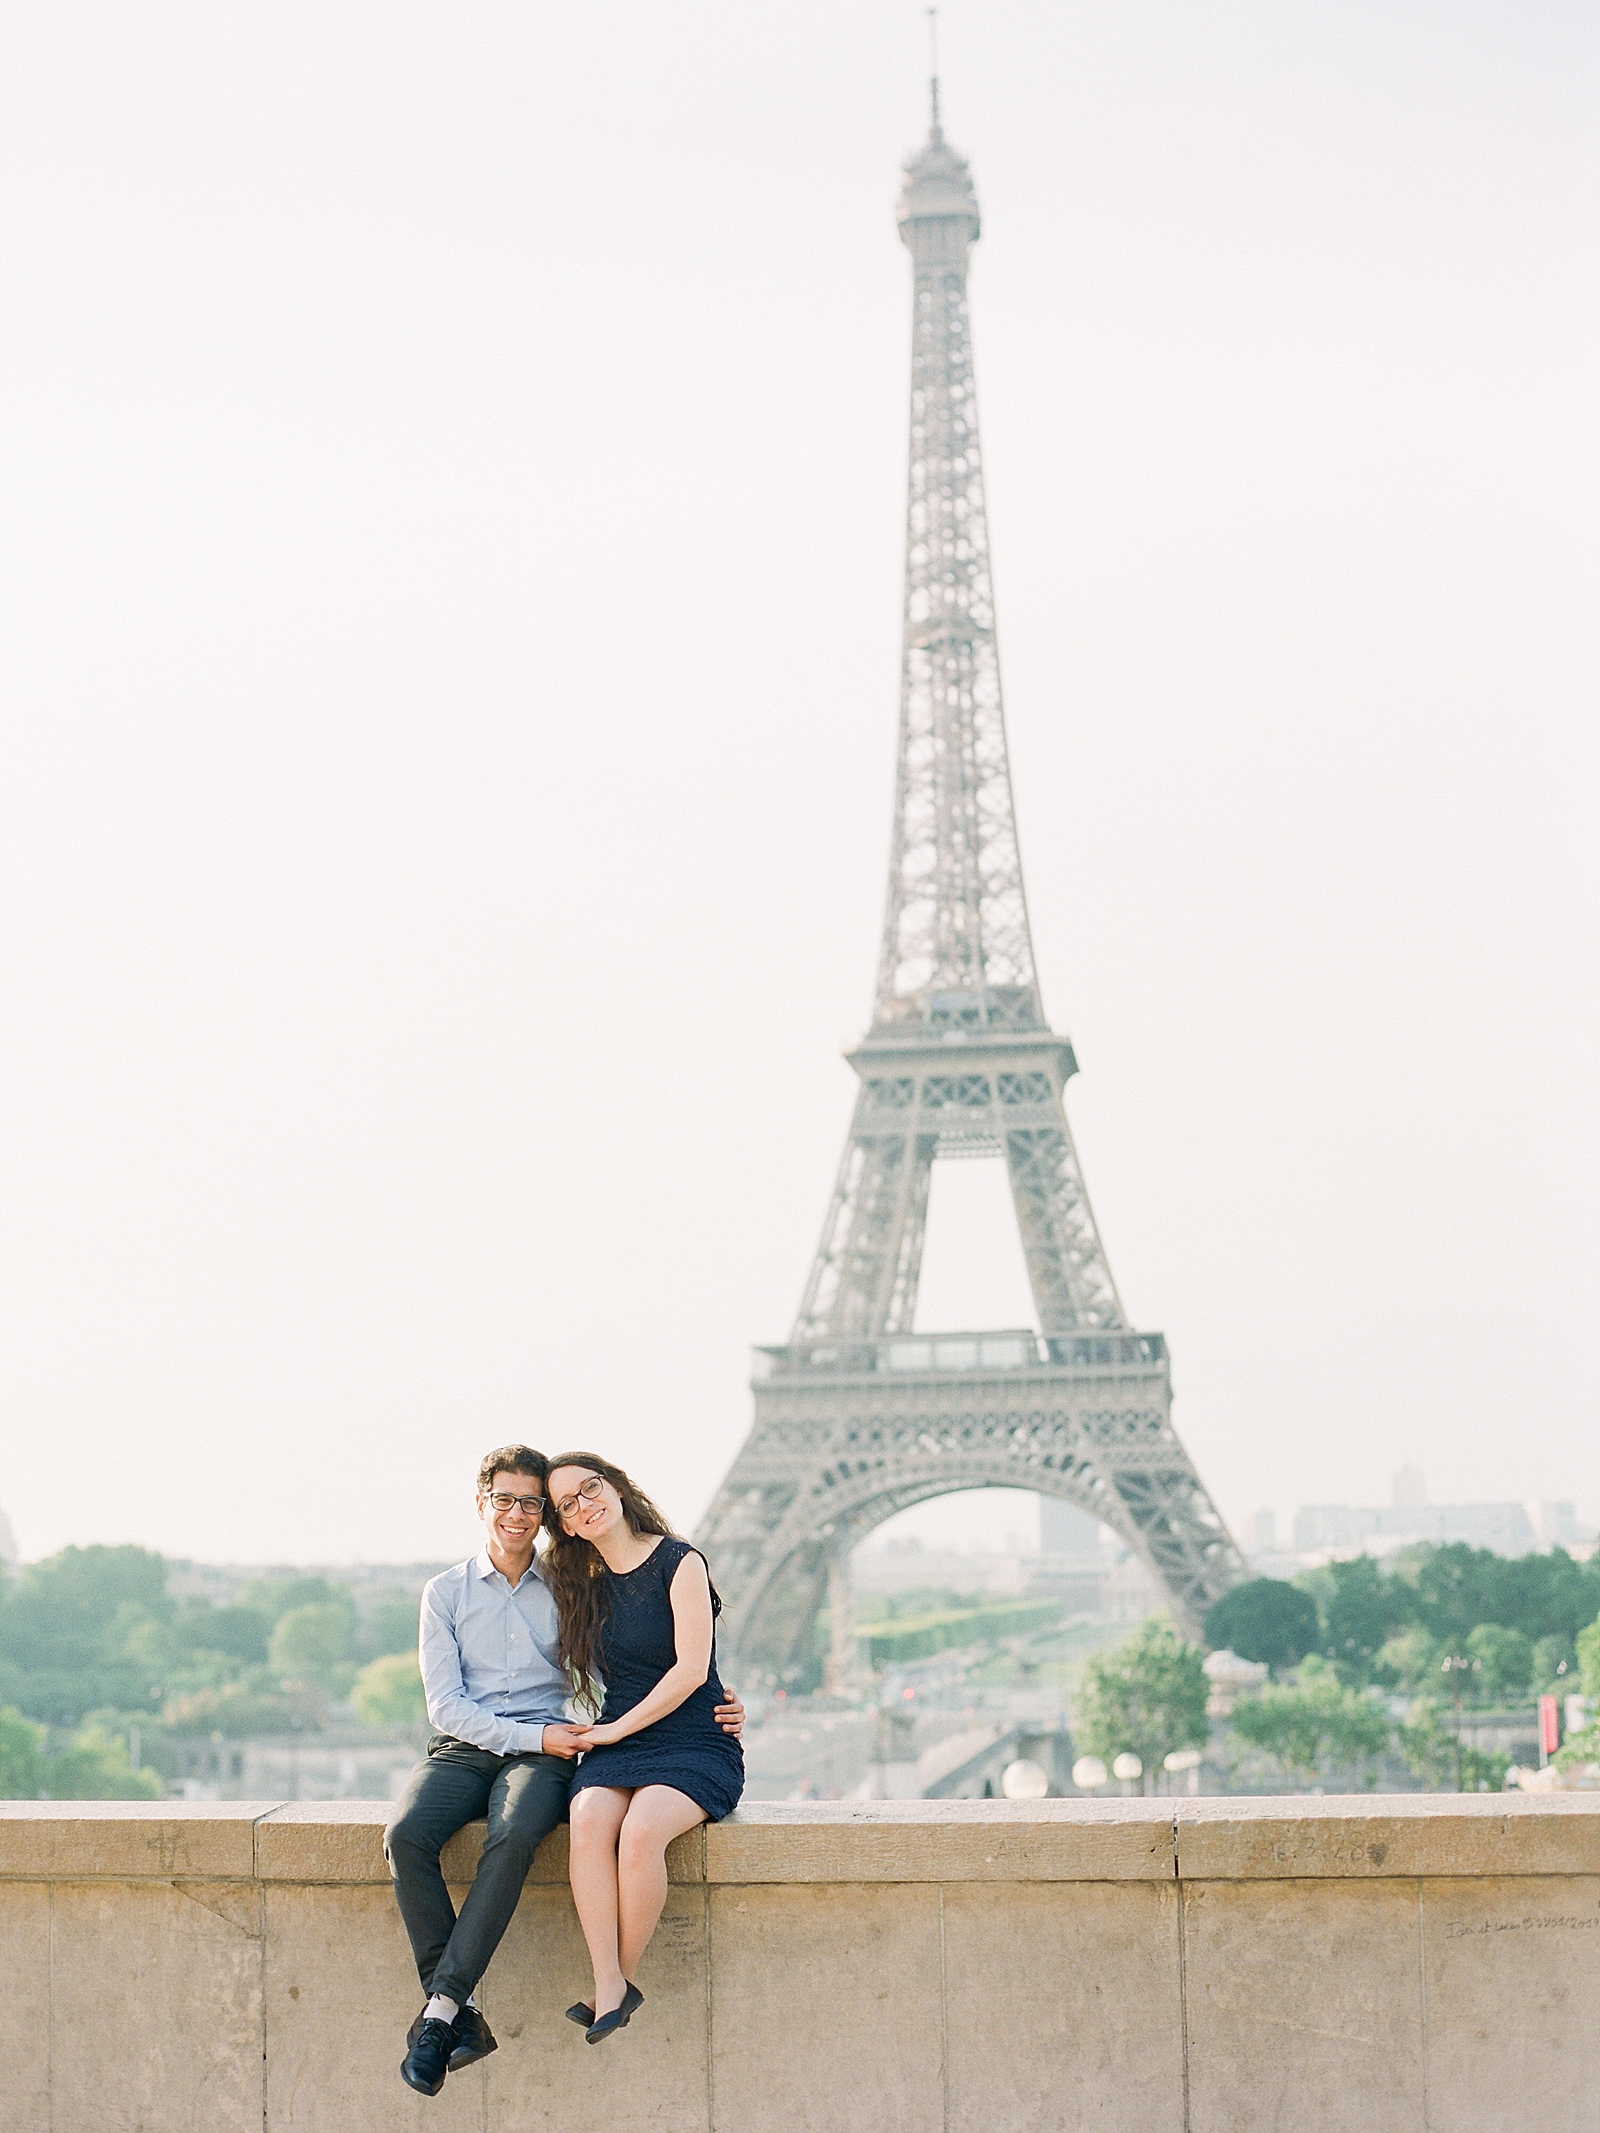 Eiffel Tower Engagement Session Couple smiling at camera sitting on wall Photo